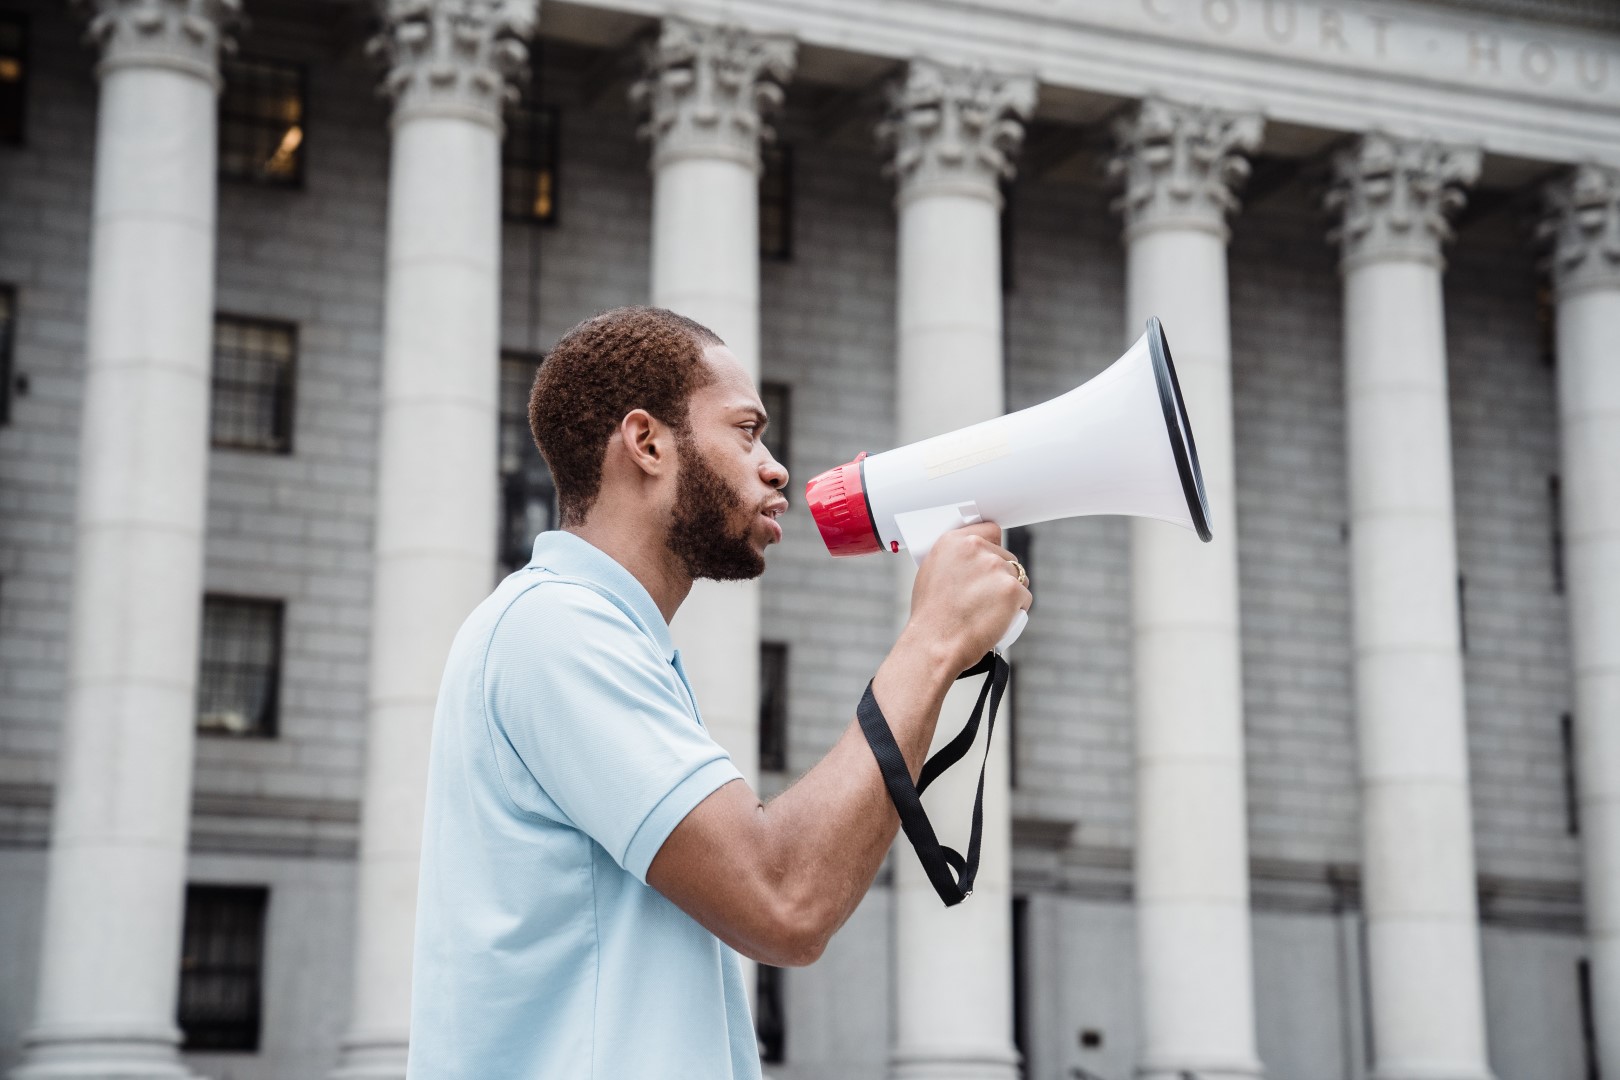 A man with a beard is holding a megaphone